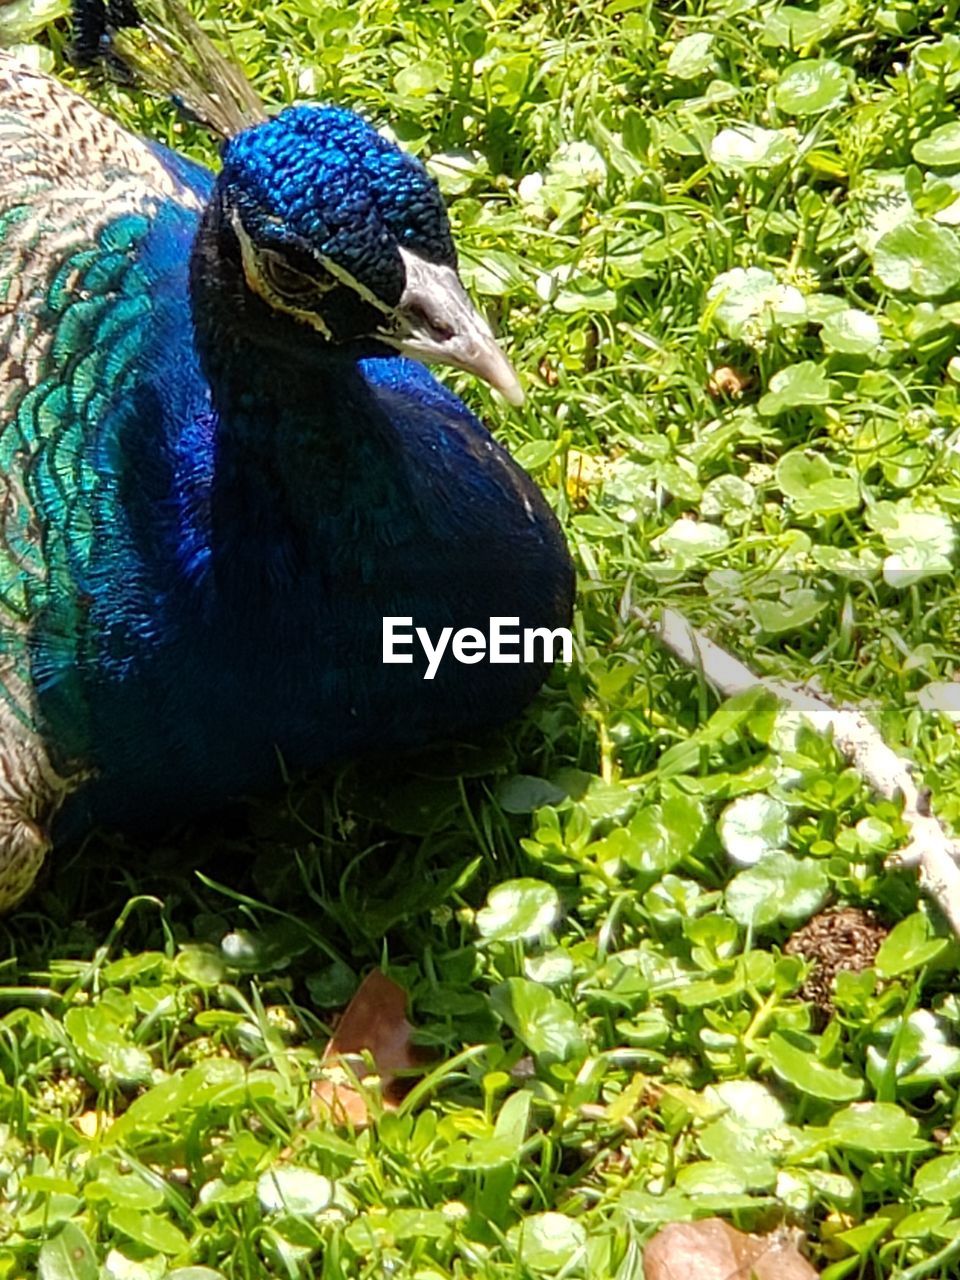 HIGH ANGLE VIEW OF A PEACOCK